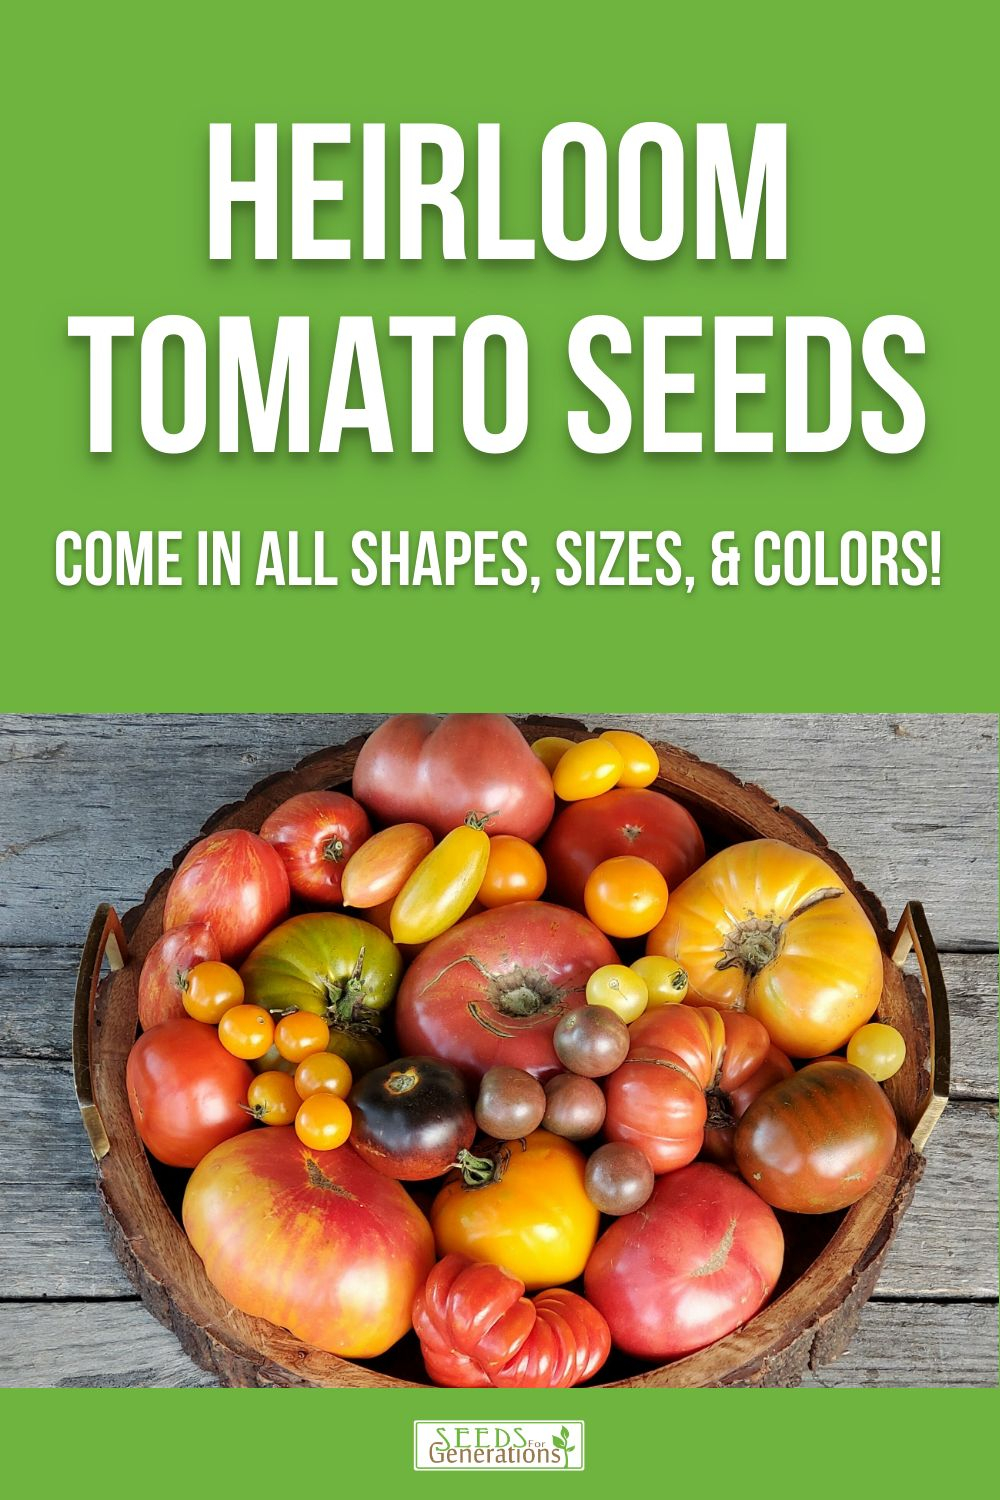 Heirloom tomato seeds come in all shapes and colors.